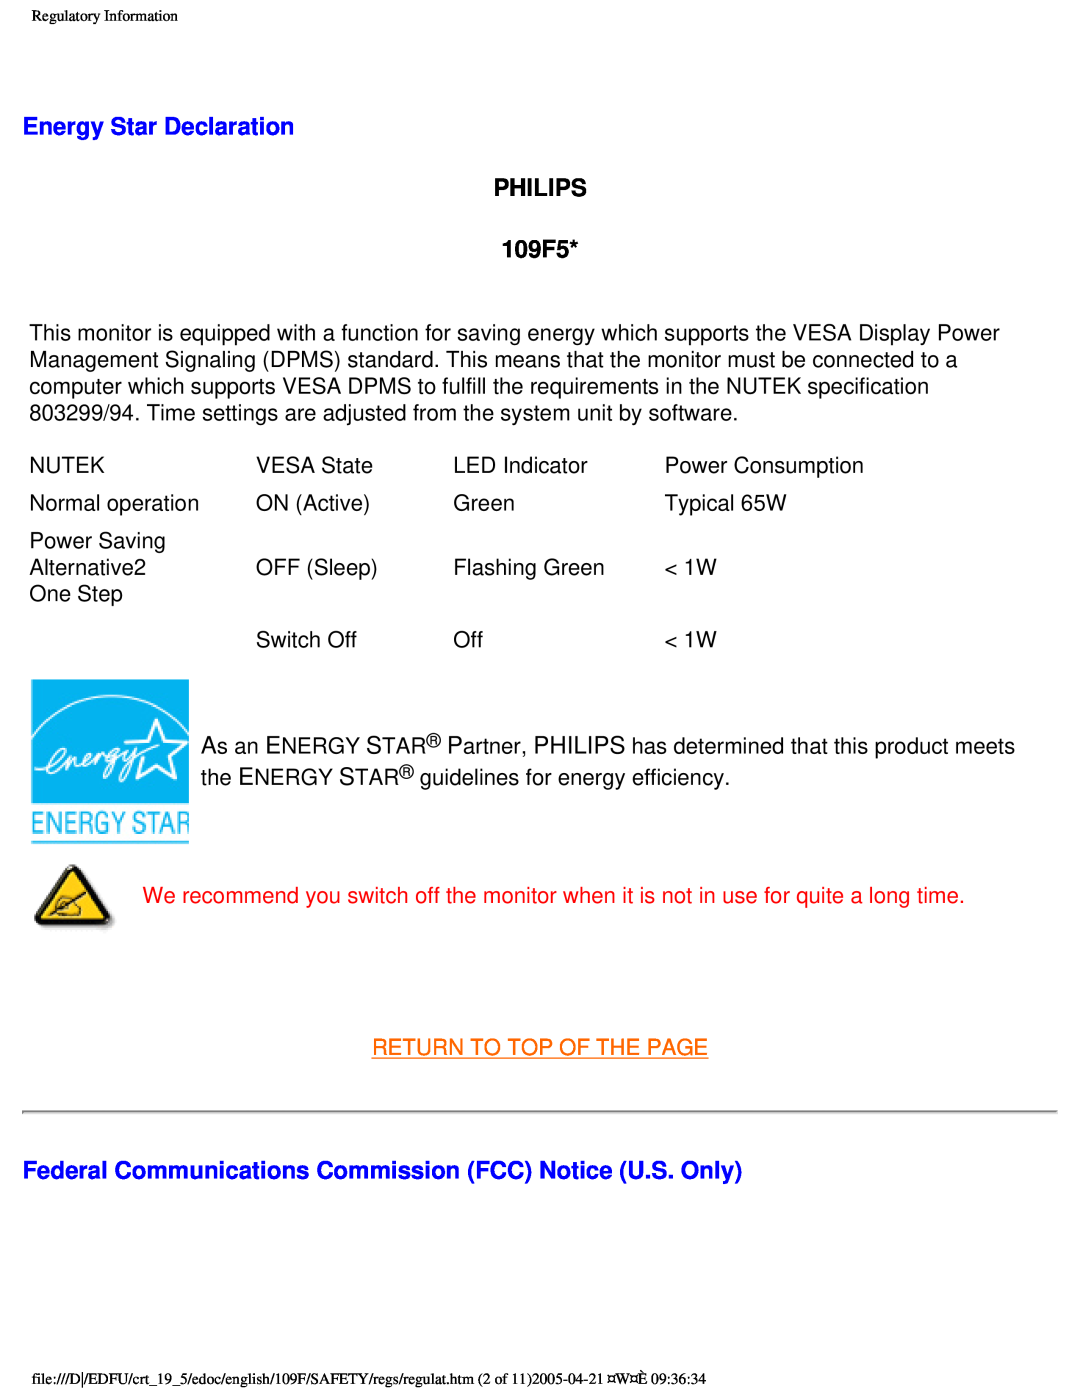 Philips user manual Energy Star Declaration, PHILIPS 109F5, Return To Top Of The Page 